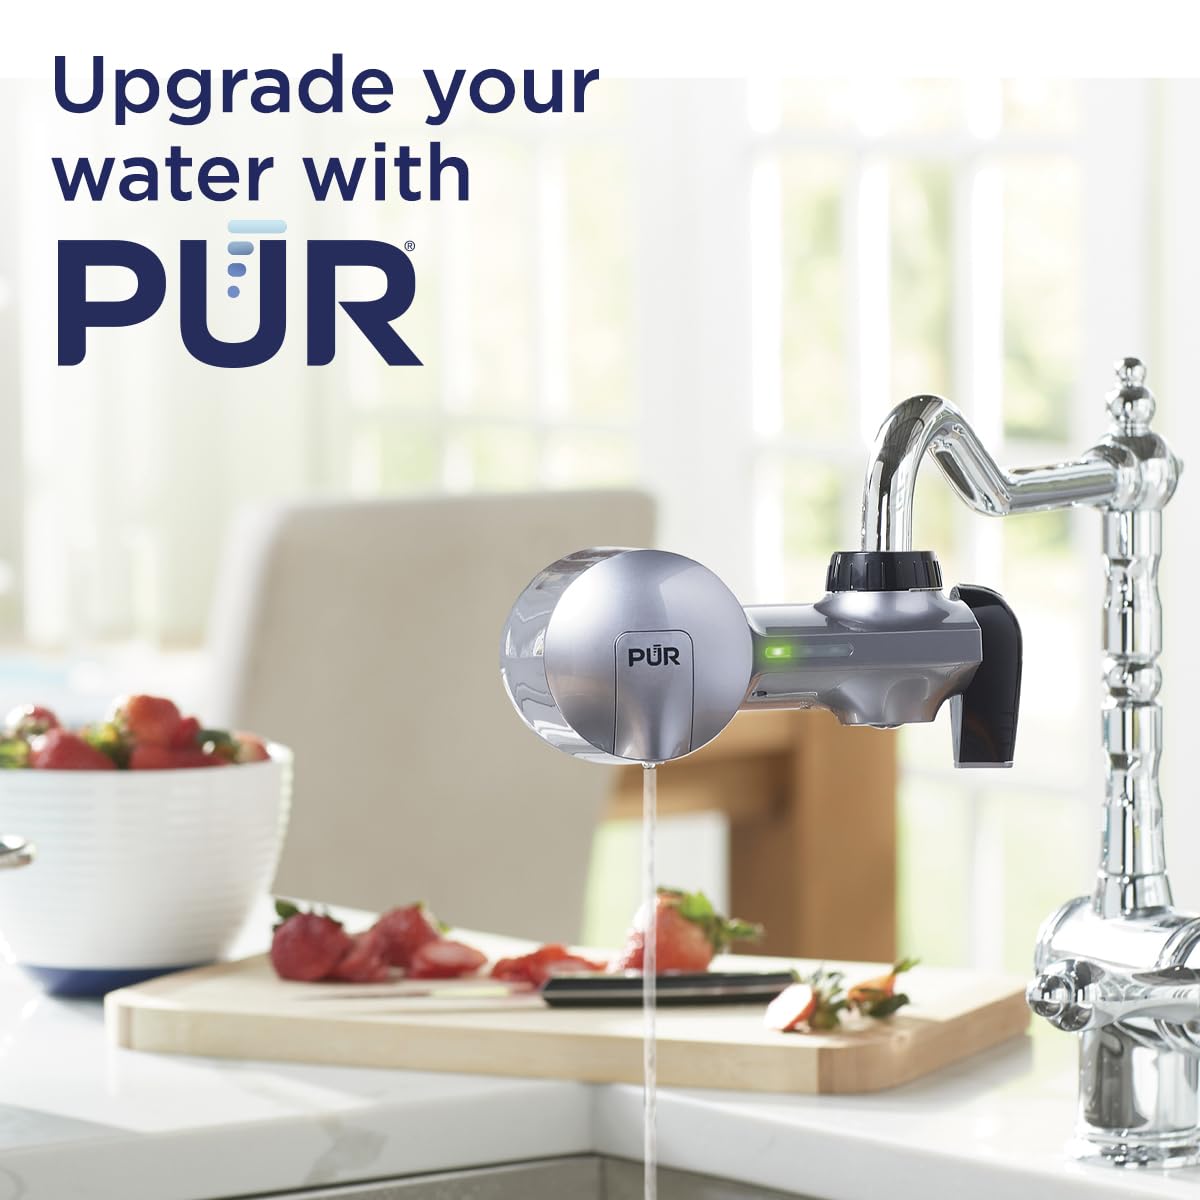 PUR PLUS Faucet Mount Water Filtration System, 3-in-1 Powerful, Natural Mineral Filtration with Lead Reduction, Horizontal, Metallic Grey, PFM350V